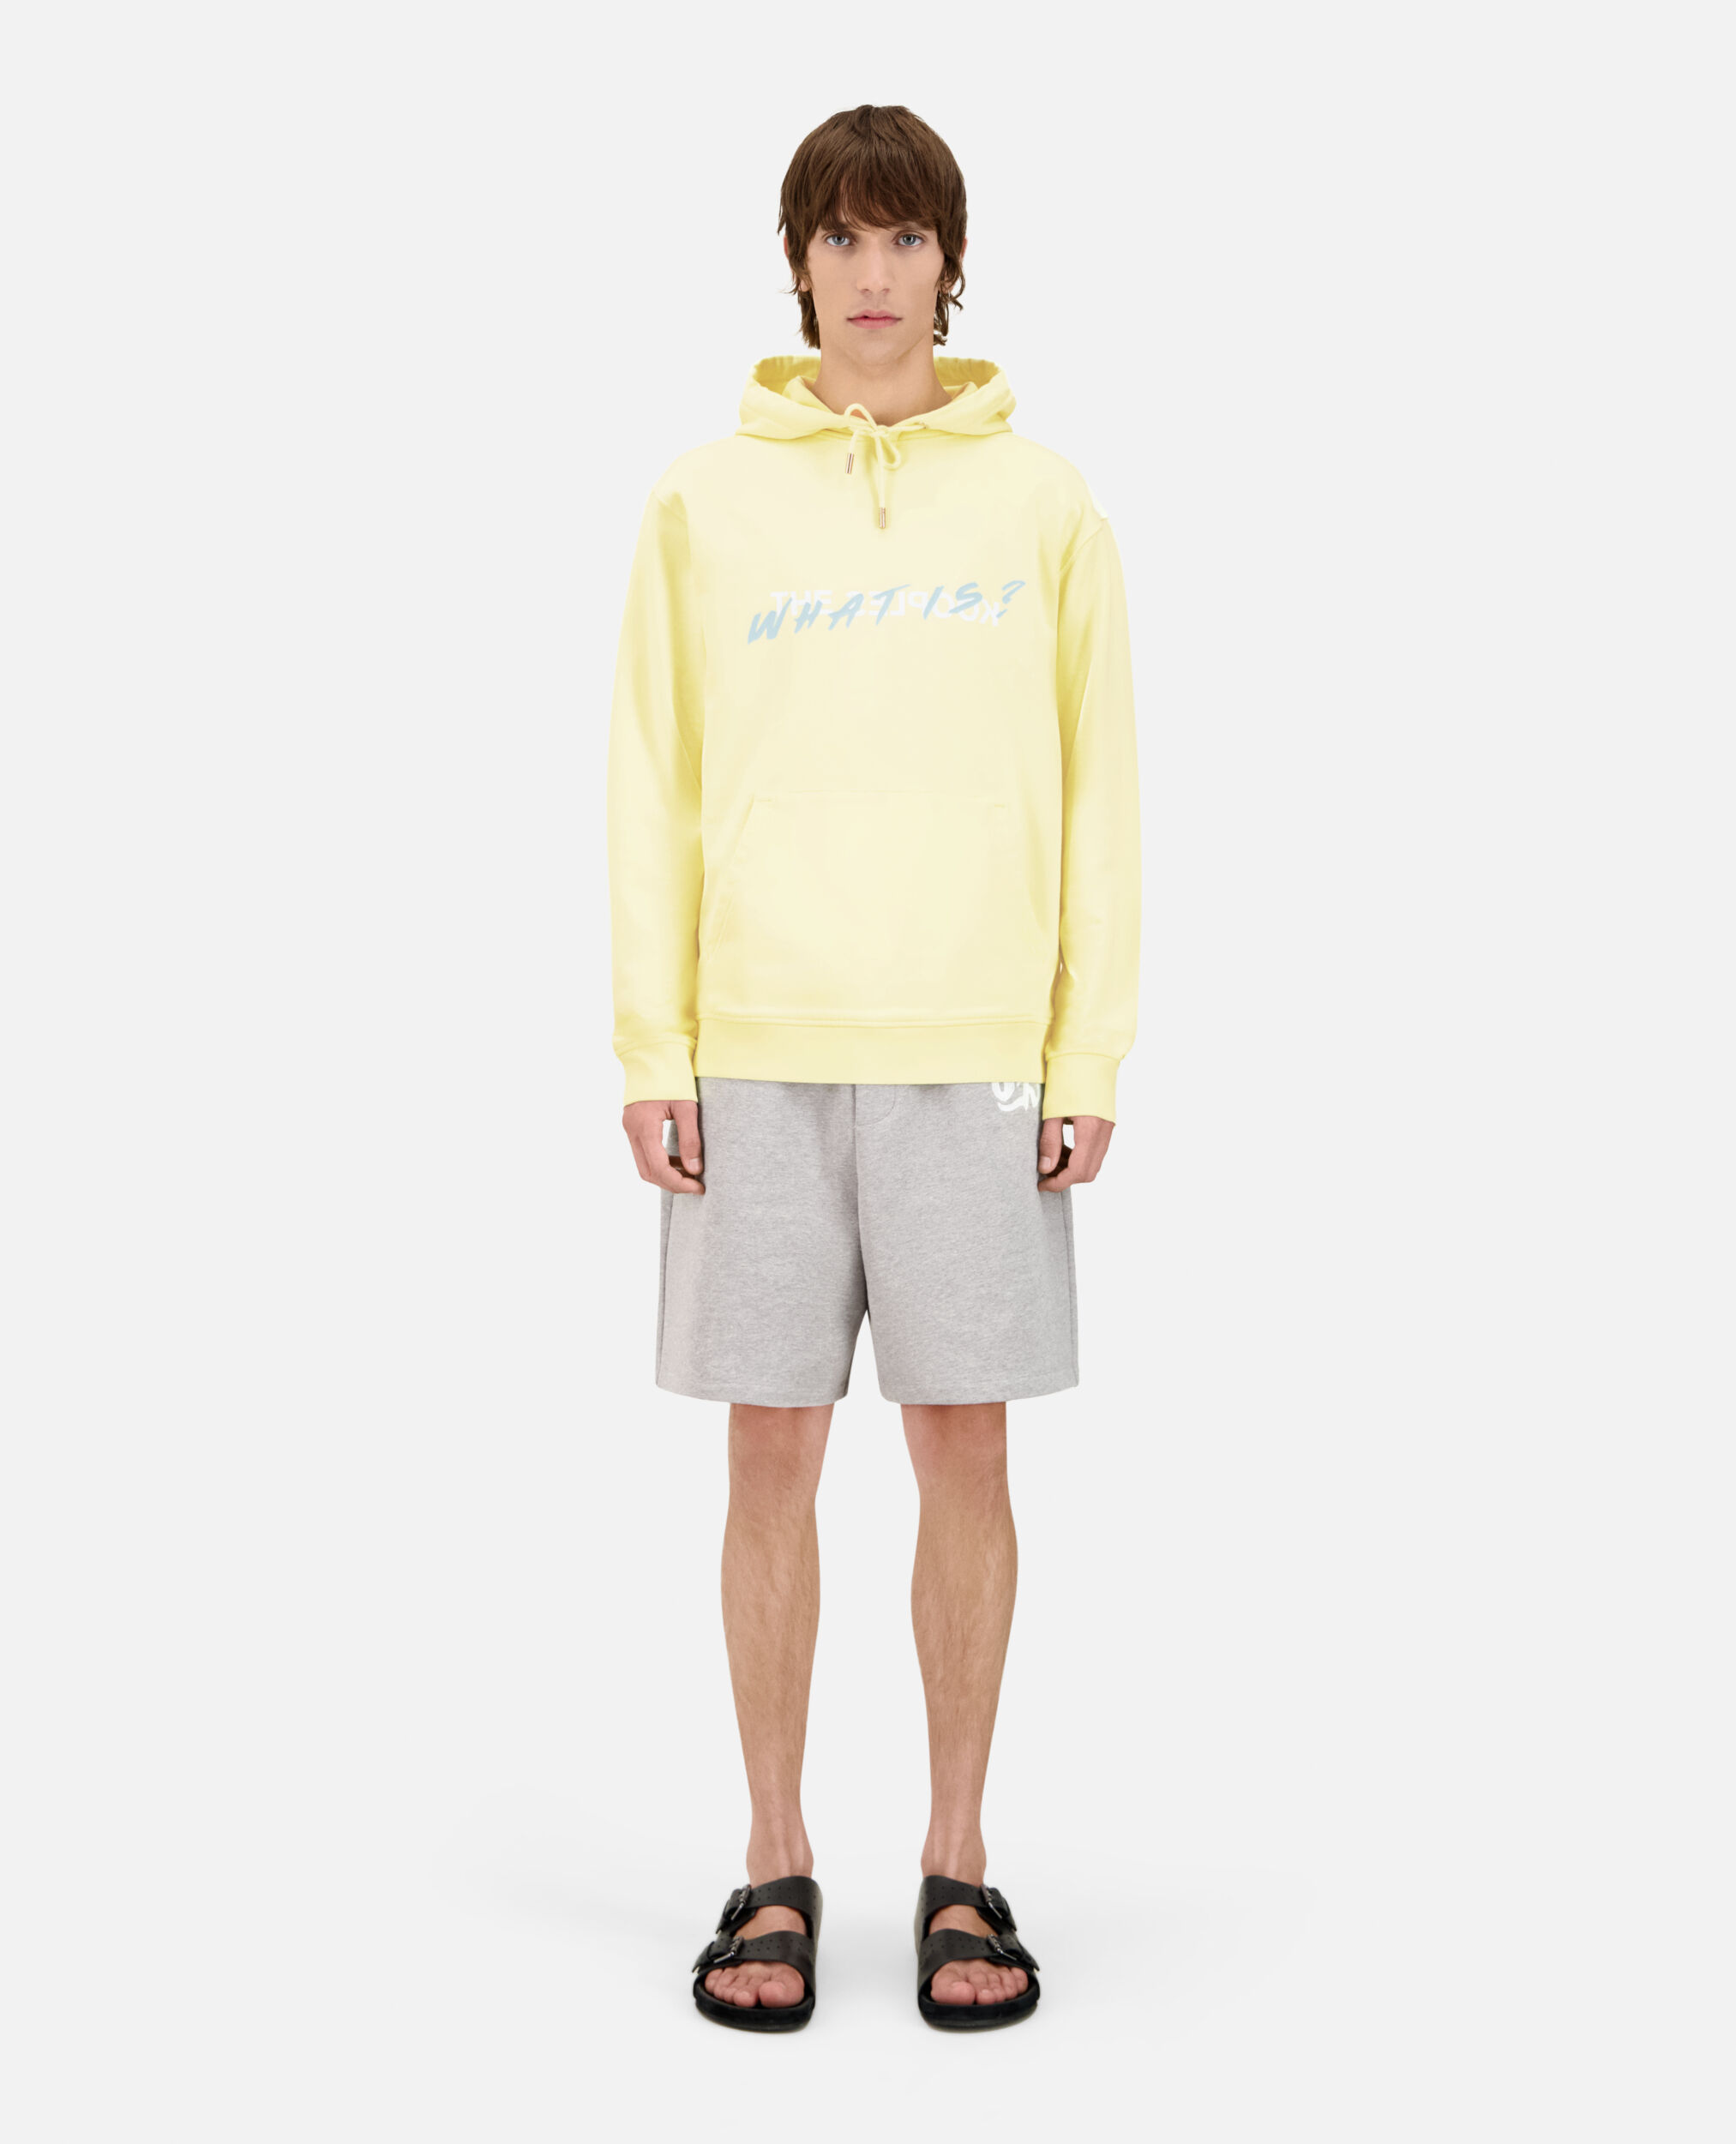 Sweatshirt à capuche What is jaune, BRIGHT YELLOW, hi-res image number null